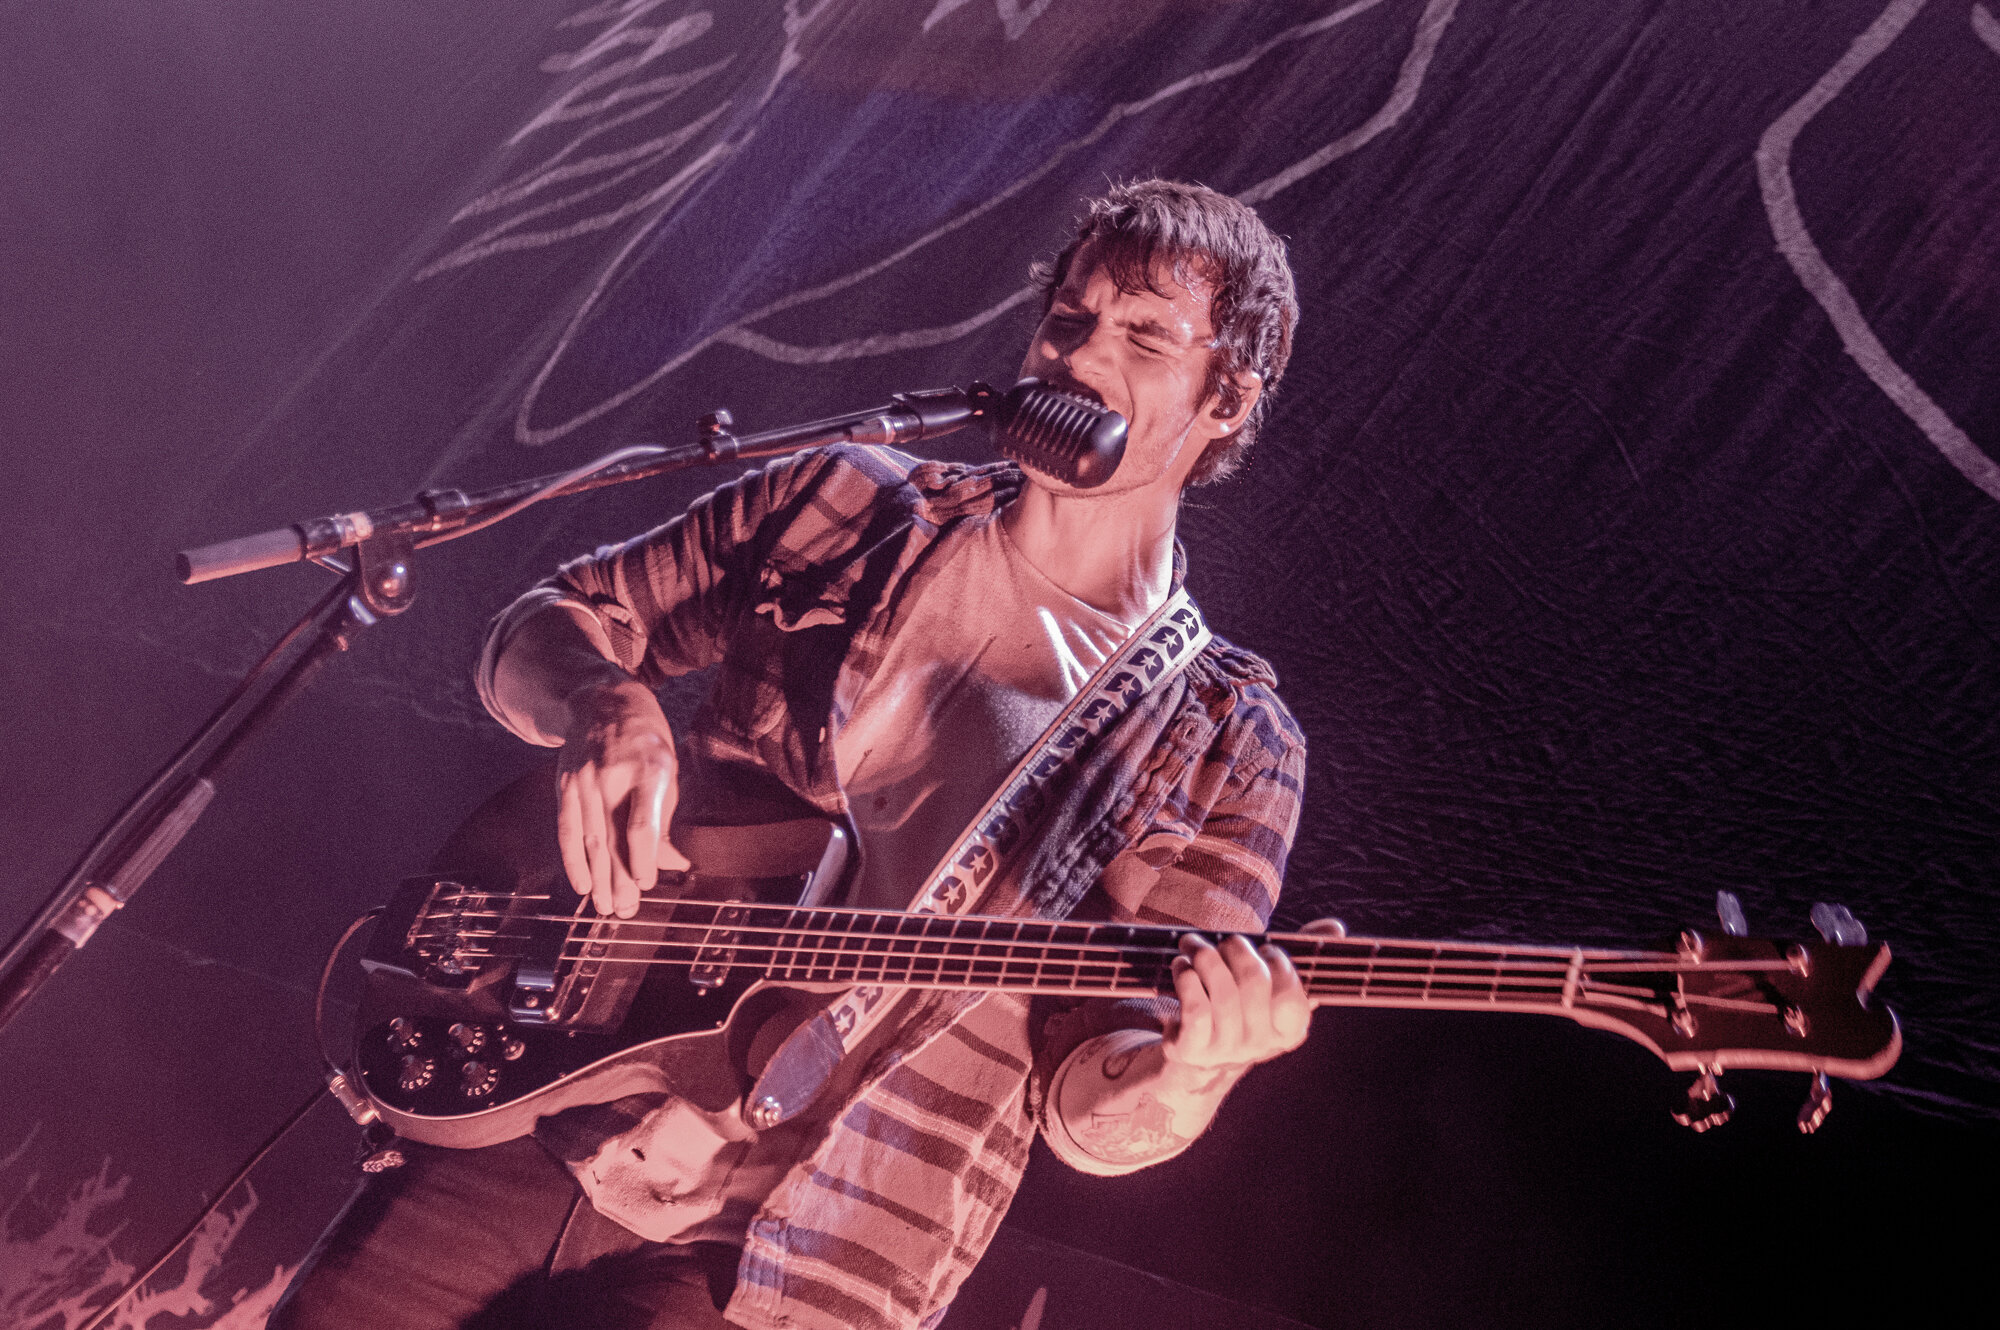 All Them Witches Live in concert at The SSE Arena, Wembley, November 2019